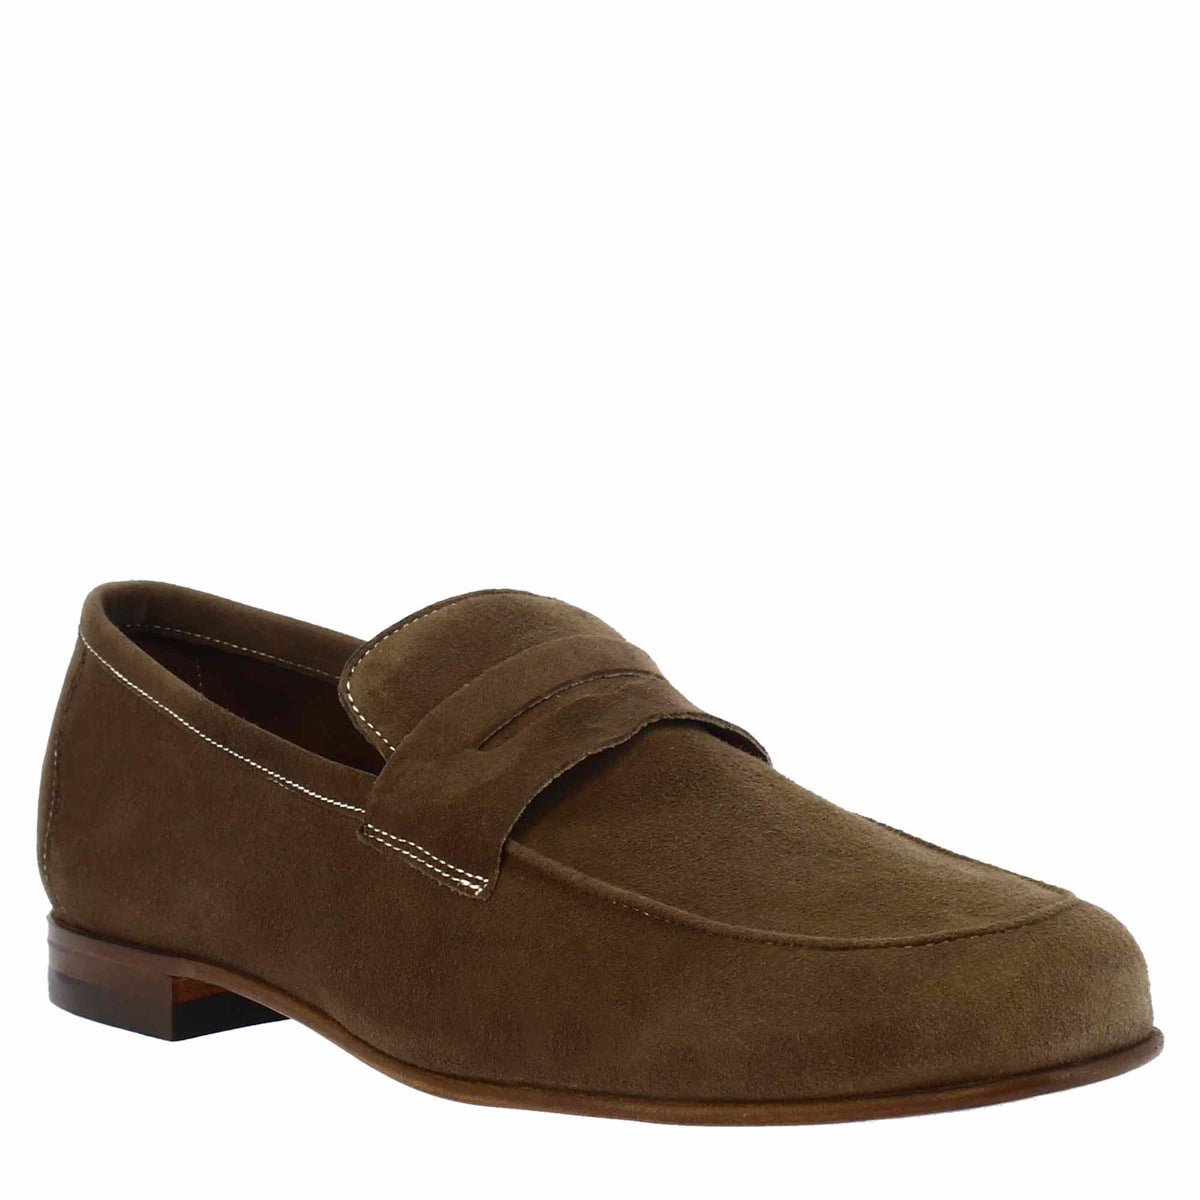 Premium Suede Leather Loafer With Red Sole Handmade Slip-on 